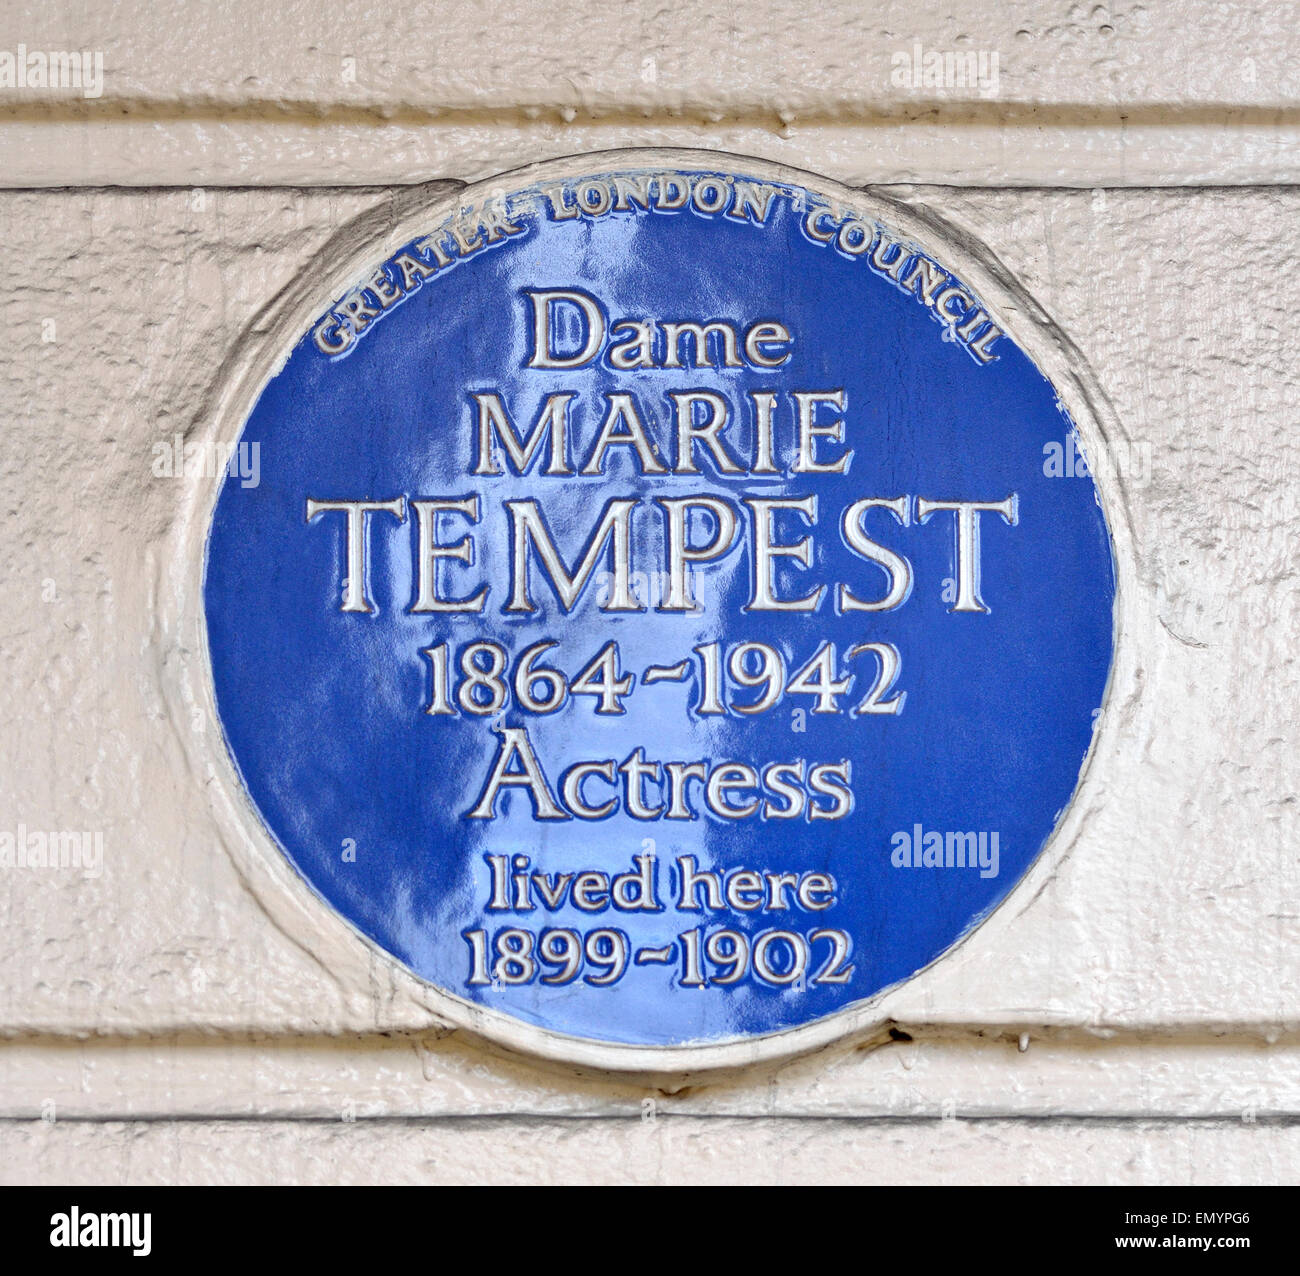 London, England, UK. Commemorative Blue Plaque: 'Dame Marie Tempest 1864-1942 actress lived here 1899-1902' Stock Photo